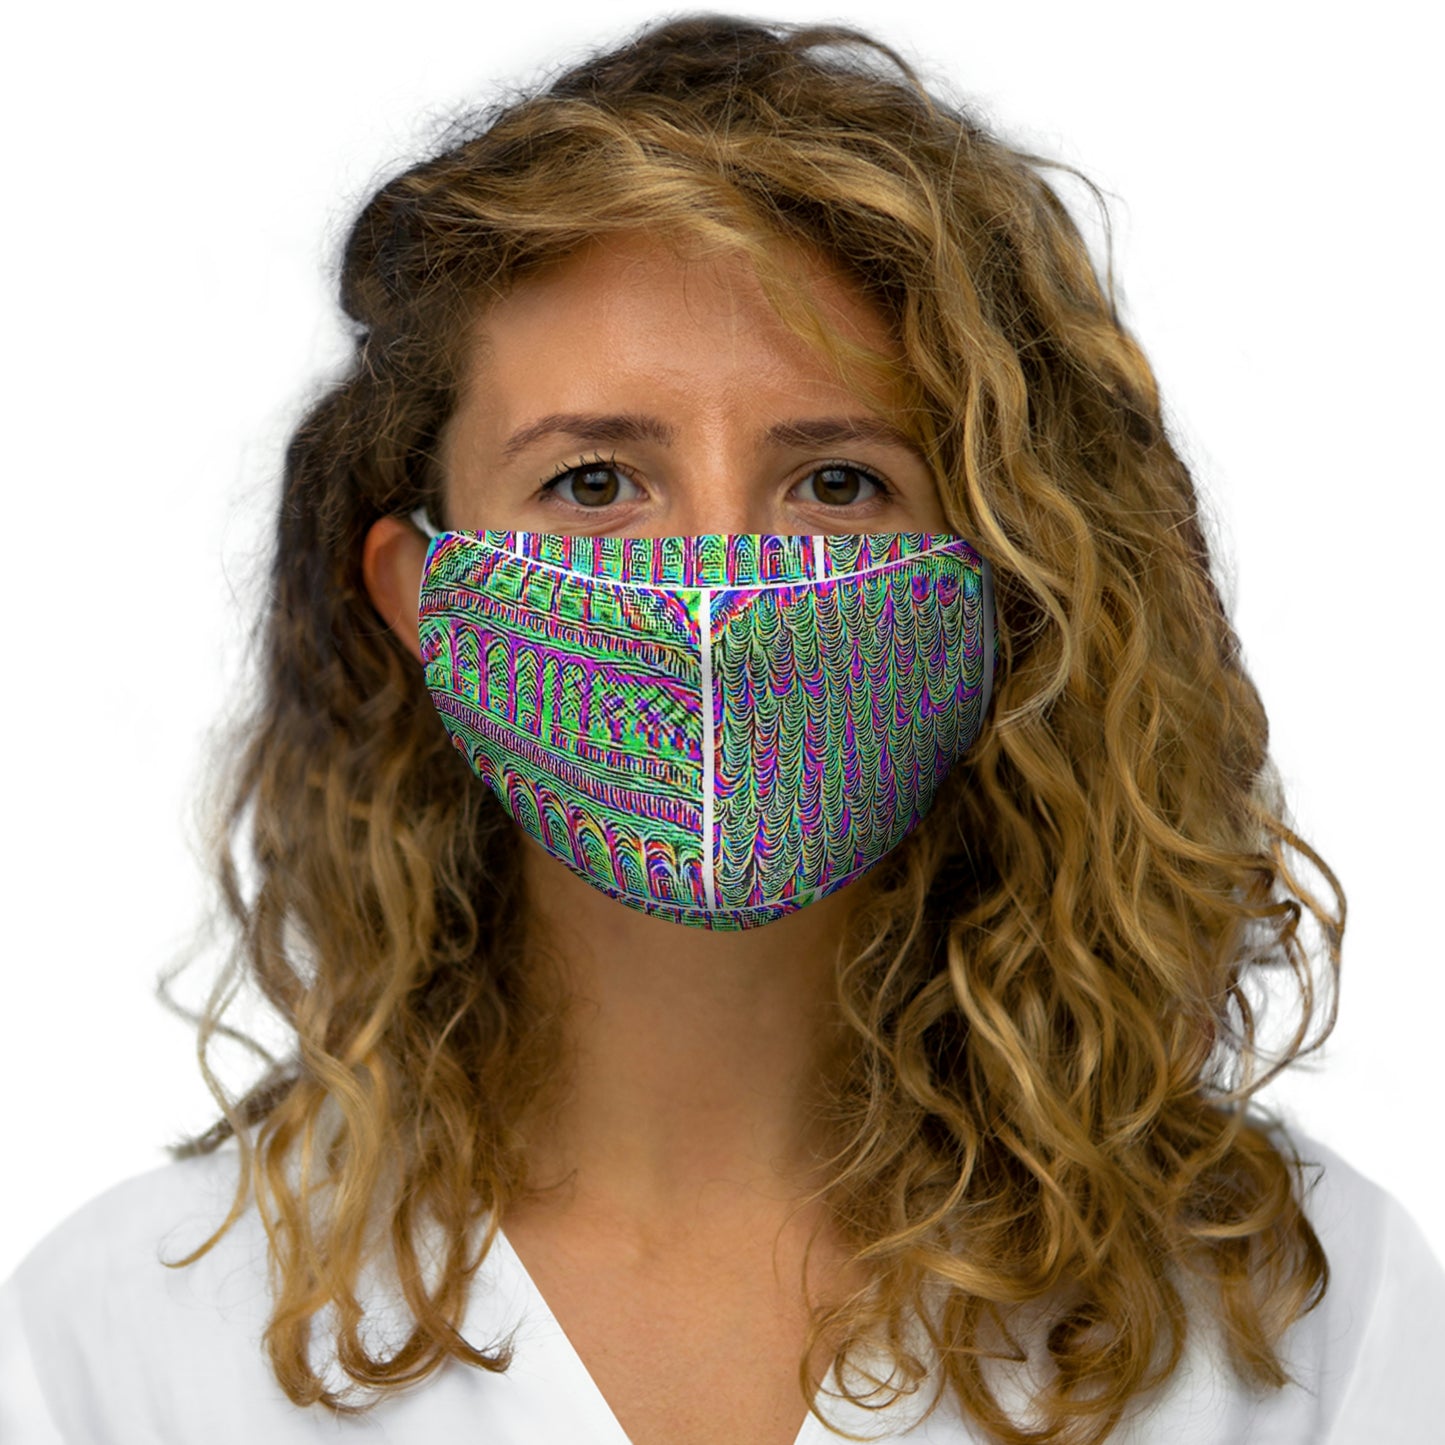 Adversarial Pattern / Anti Facial recognition / Snug-Fit Face Mask